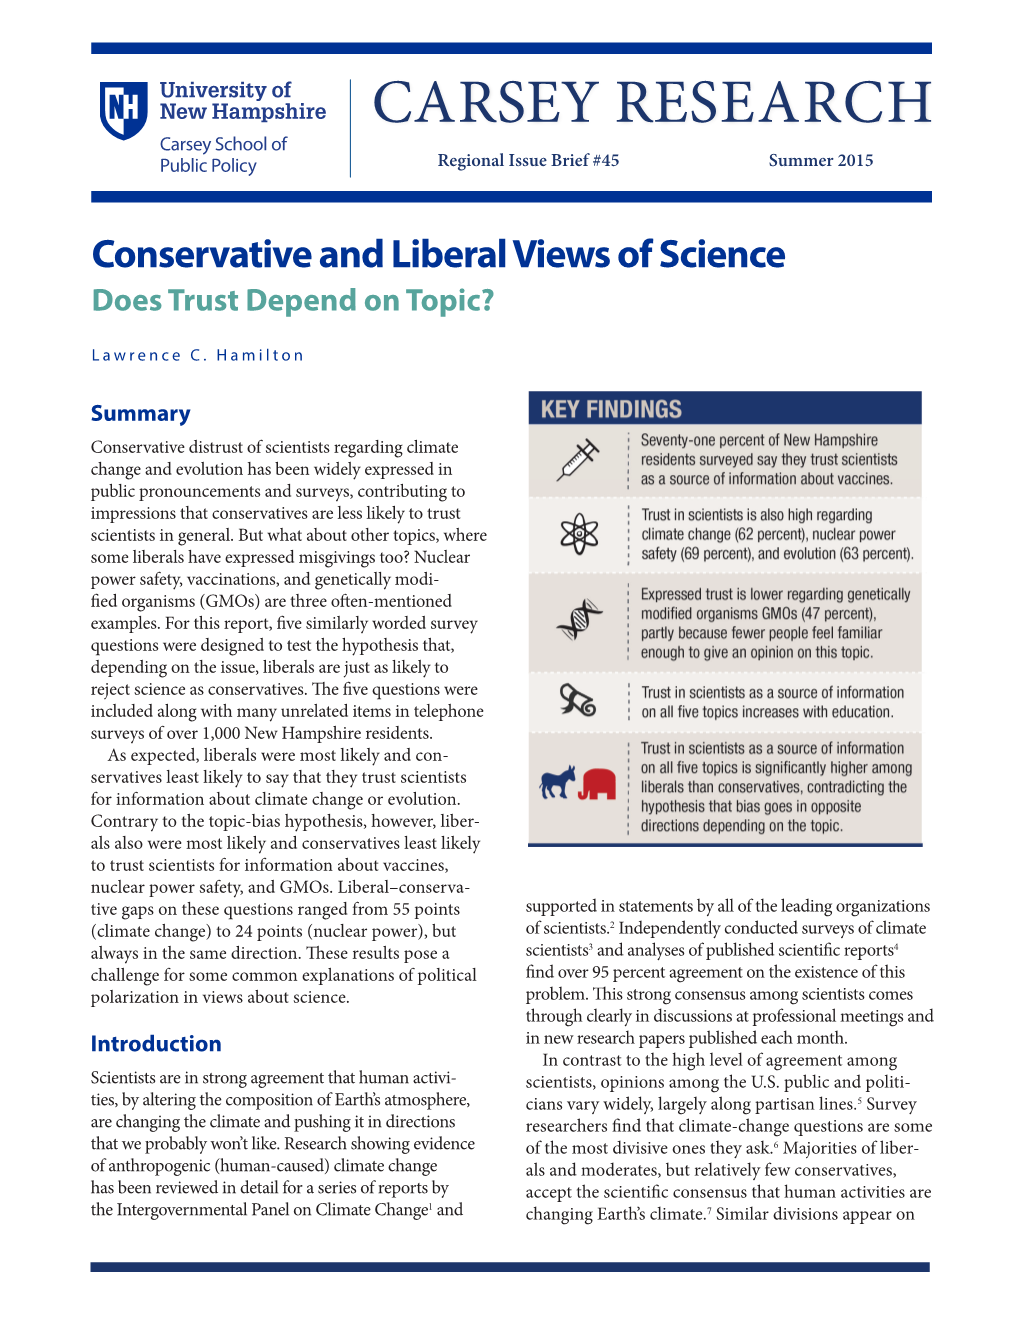 Conservative and Liberal Views of Science Does Trust Depend on Topic?